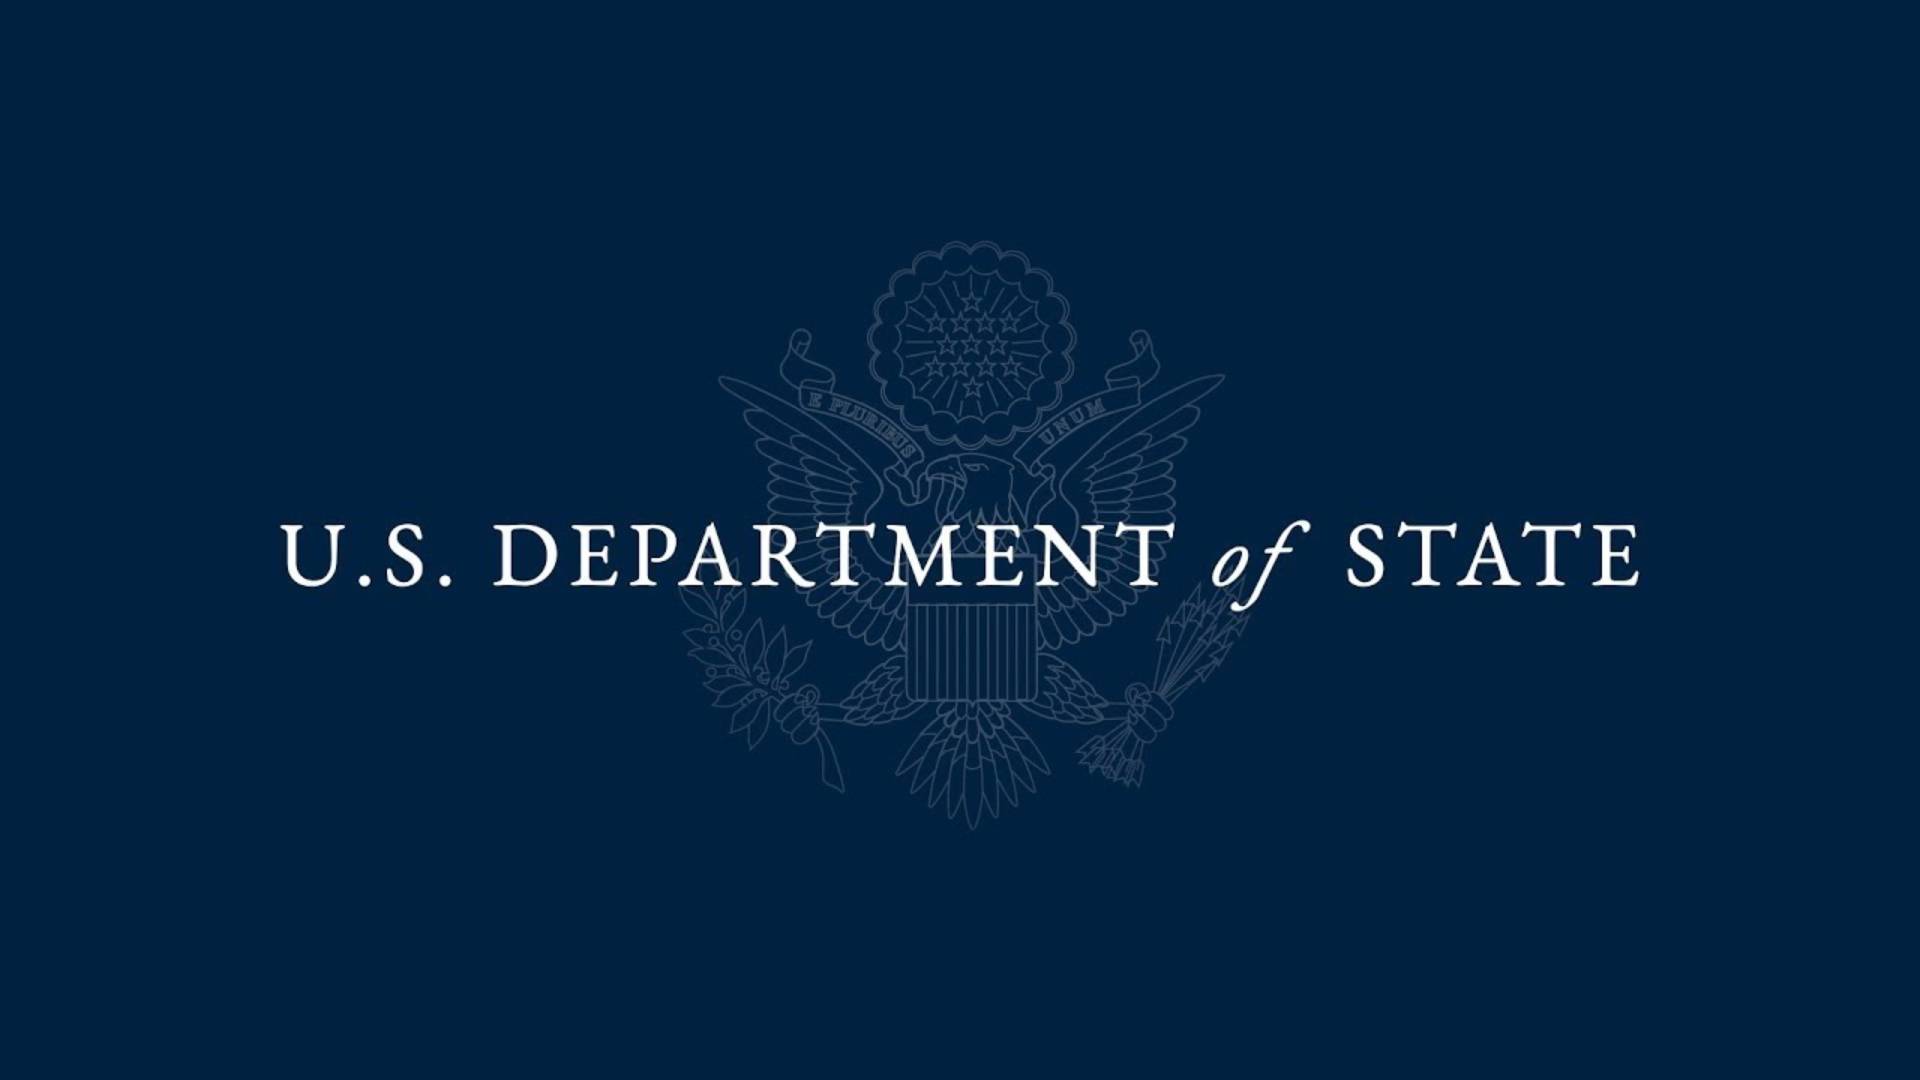  The US Department of State logo